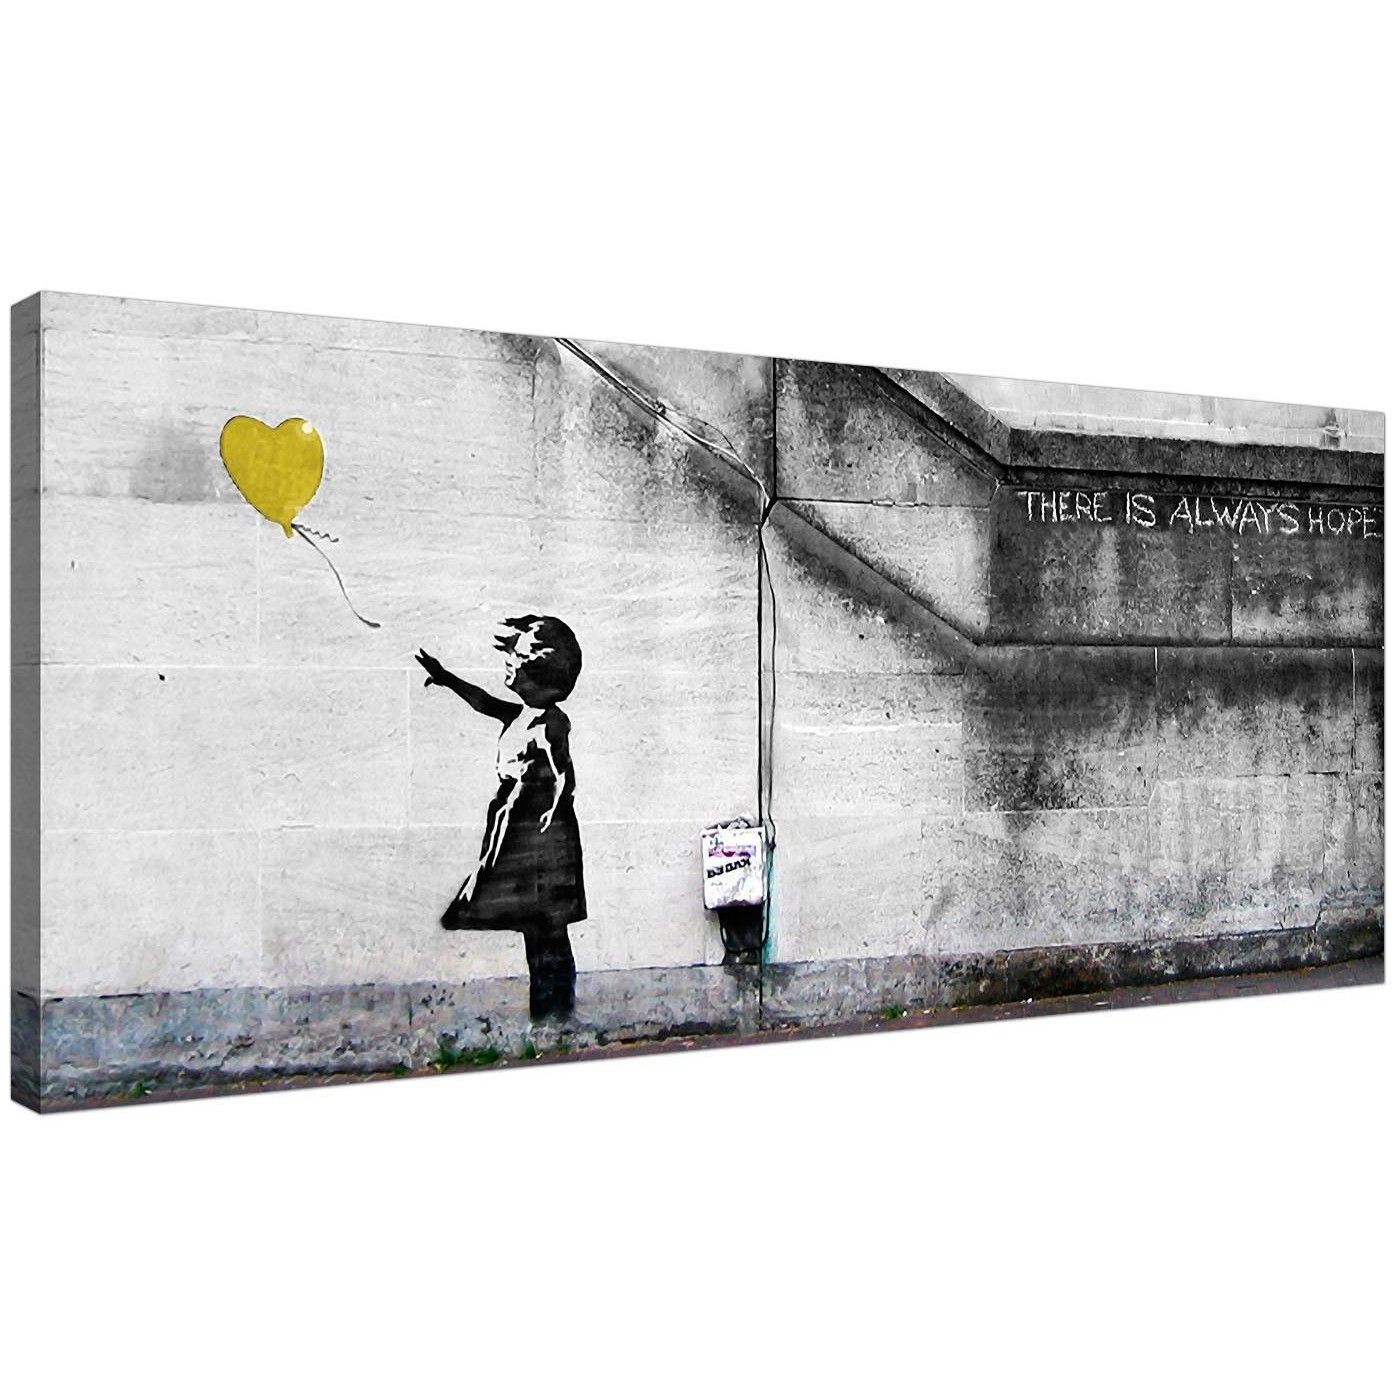 Large Panoramic Canvas Wall Art Bedroom Cm X Cm Spectacular Wall Art Regarding Gray Canvas Wall Art (View 16 of 20)